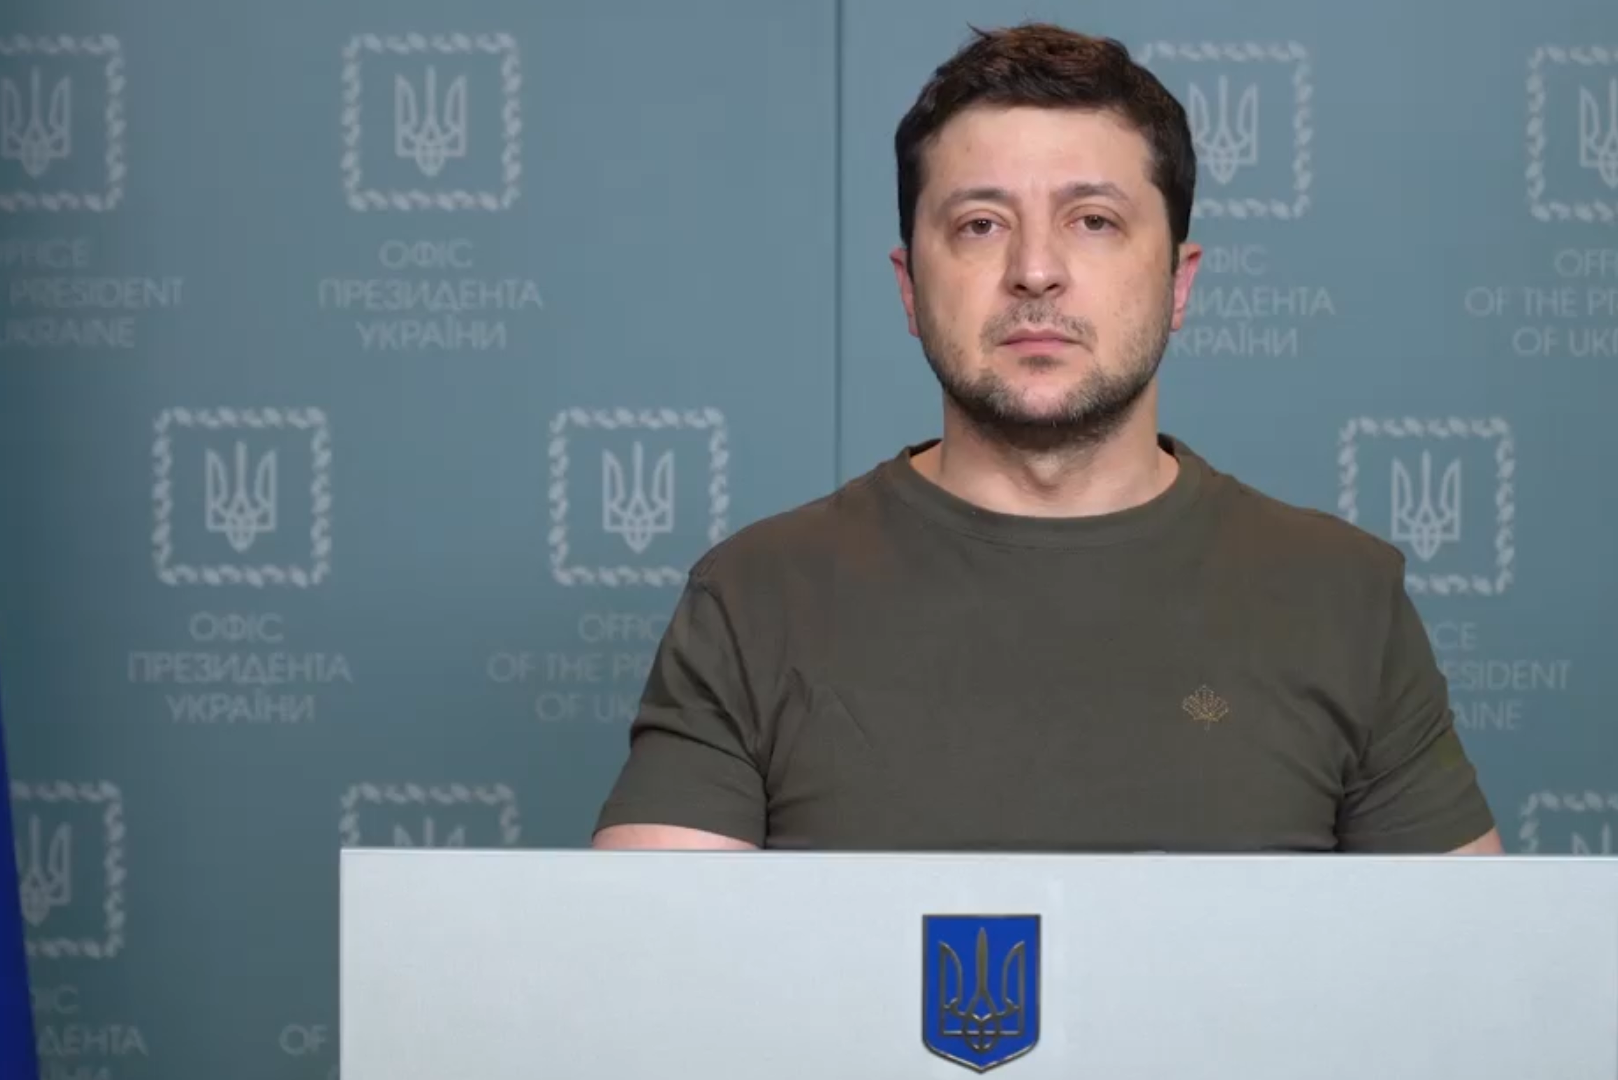 West wants to help President Zelensky with government in exile